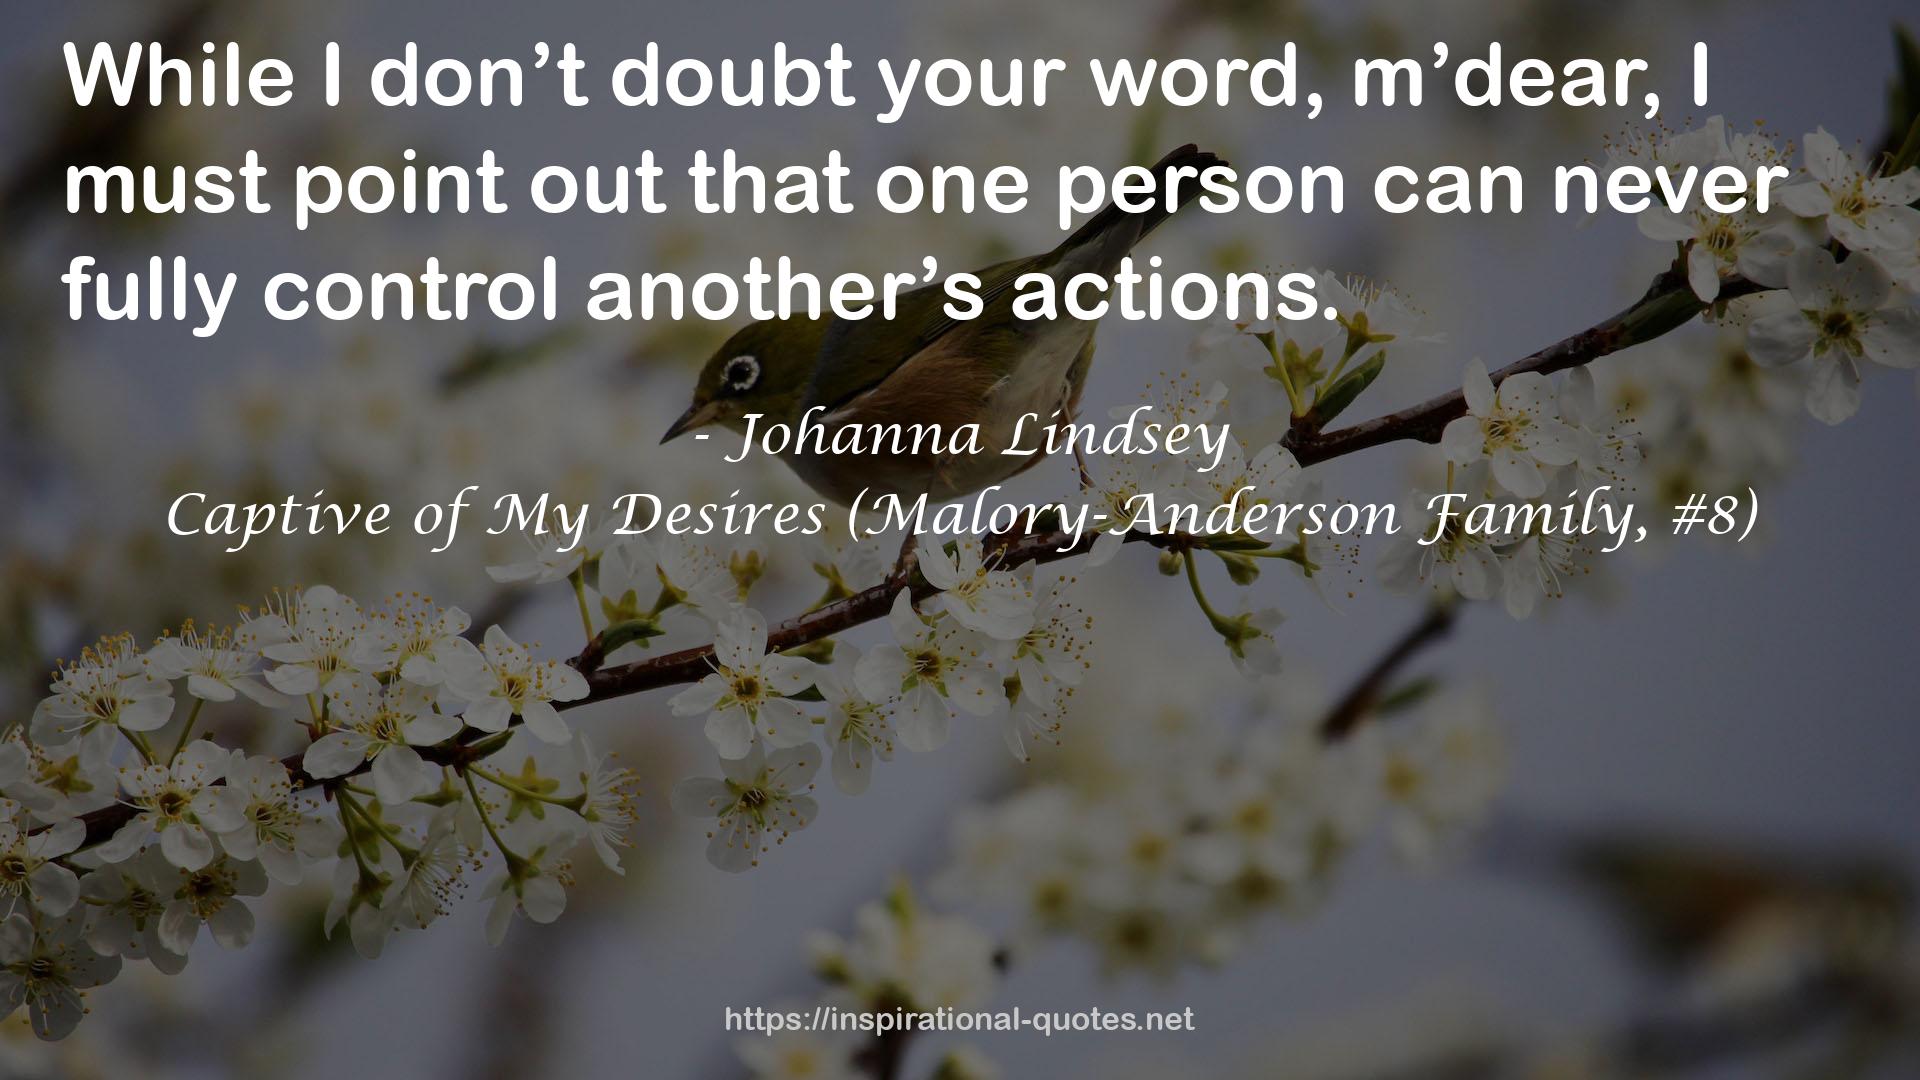 Captive of My Desires (Malory-Anderson Family, #8) QUOTES